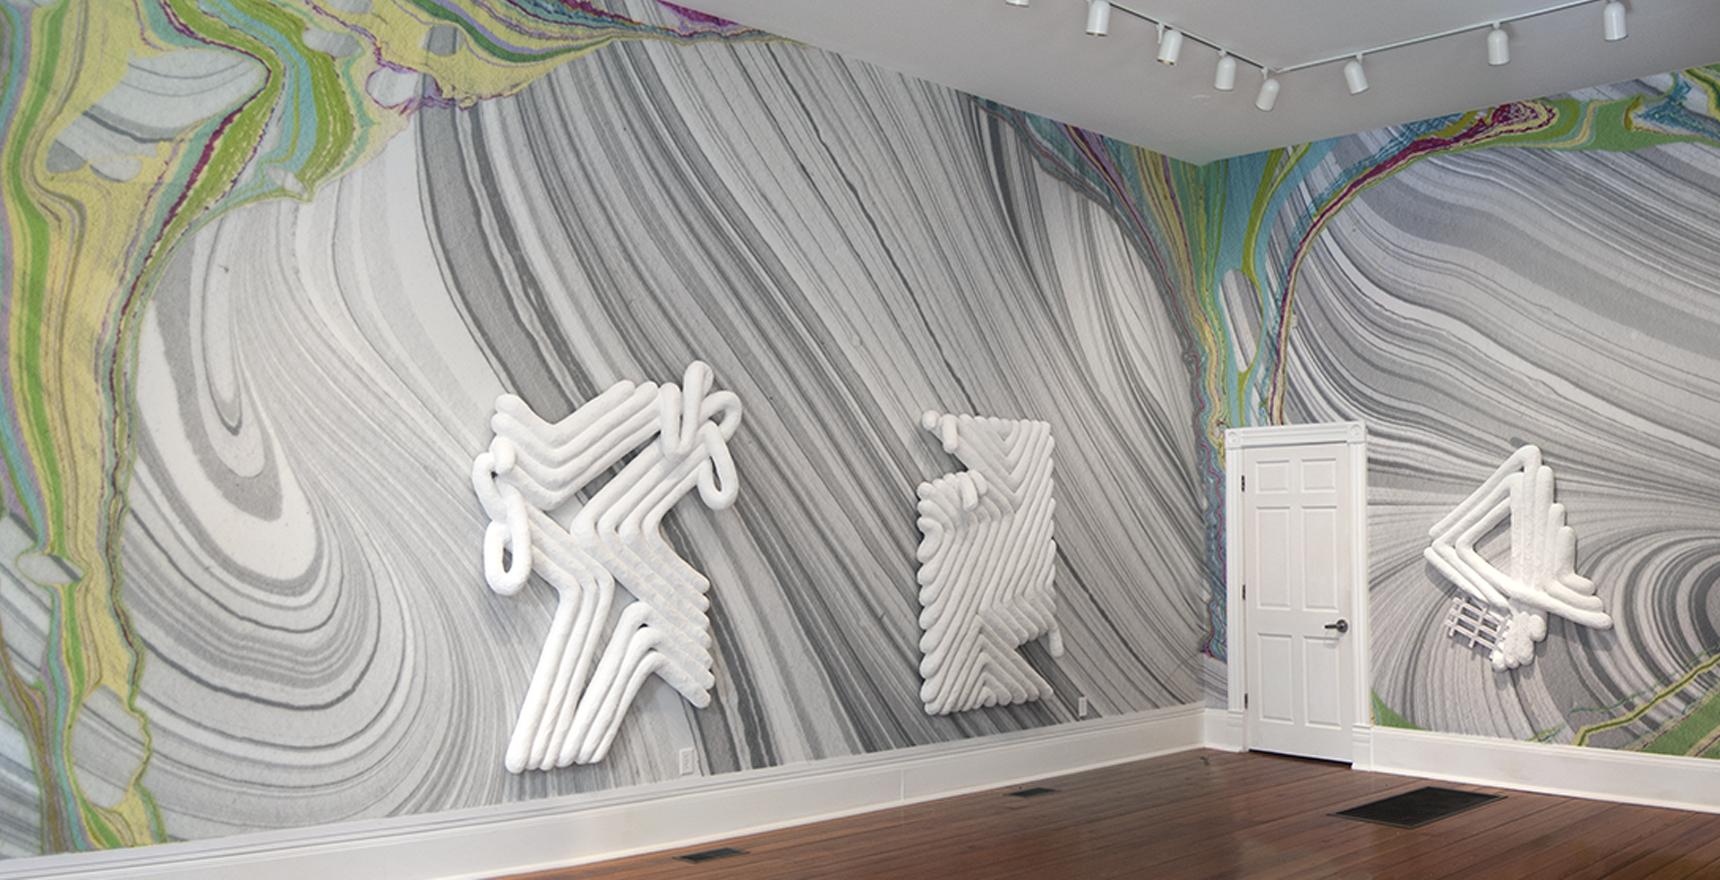 walls painted swirling textures white geometric tubular sculptures hang on walls